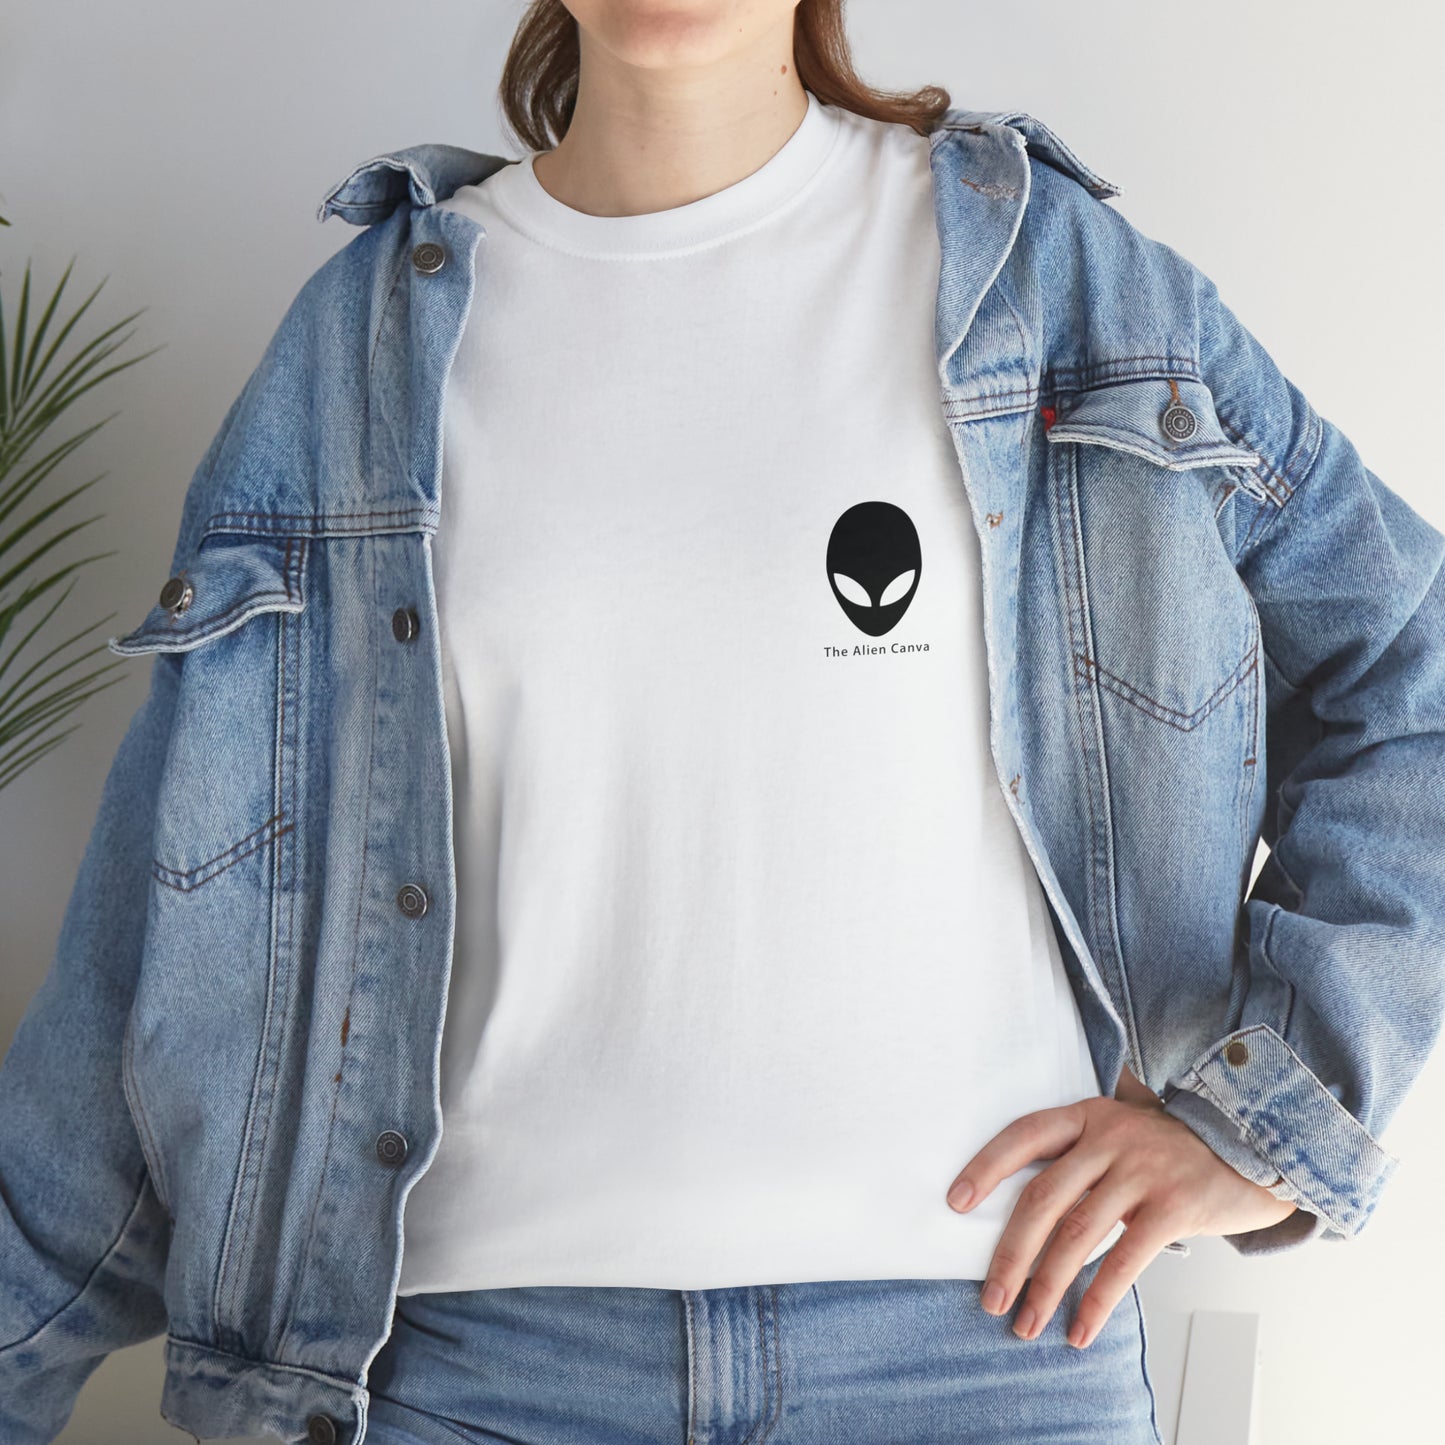 "A Breezy Skyscape: A Combination of Tradition and Modernity" - The Alien T-shirt